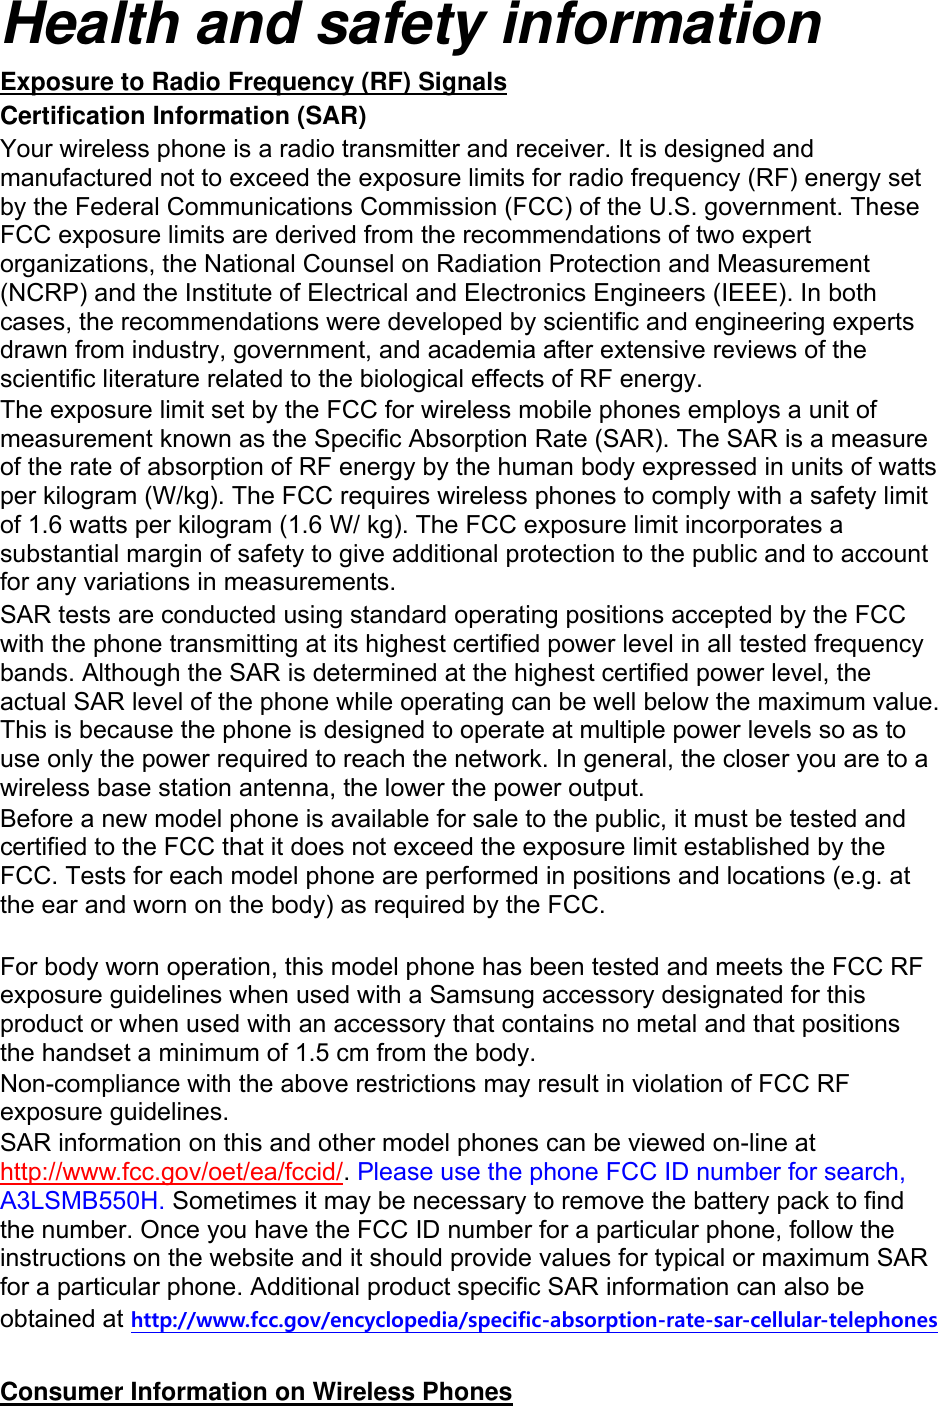 Health and safety information Exposure to Radio Frequency (RF) Signals Certification Information (SAR) Your wireless phone is a radio transmitter and receiver. It is designed and manufactured not to exceed the exposure limits for radio frequency (RF) energy set by the Federal Communications Commission (FCC) of the U.S. government. These FCC exposure limits are derived from the recommendations of two expert organizations, the National Counsel on Radiation Protection and Measurement (NCRP) and the Institute of Electrical and Electronics Engineers (IEEE). In both cases, the recommendations were developed by scientific and engineering experts drawn from industry, government, and academia after extensive reviews of the scientific literature related to the biological effects of RF energy. The exposure limit set by the FCC for wireless mobile phones employs a unit of measurement known as the Specific Absorption Rate (SAR). The SAR is a measure of the rate of absorption of RF energy by the human body expressed in units of watts per kilogram (W/kg). The FCC requires wireless phones to comply with a safety limit of 1.6 watts per kilogram (1.6 W/ kg). The FCC exposure limit incorporates a substantial margin of safety to give additional protection to the public and to account for any variations in measurements. SAR tests are conducted using standard operating positions accepted by the FCC with the phone transmitting at its highest certified power level in all tested frequency bands. Although the SAR is determined at the highest certified power level, the actual SAR level of the phone while operating can be well below the maximum value. This is because the phone is designed to operate at multiple power levels so as to use only the power required to reach the network. In general, the closer you are to a wireless base station antenna, the lower the power output. Before a new model phone is available for sale to the public, it must be tested and certified to the FCC that it does not exceed the exposure limit established by the FCC. Tests for each model phone are performed in positions and locations (e.g. at the ear and worn on the body) as required by the FCC.      For body worn operation, this model phone has been tested and meets the FCC RF exposure guidelines when used with a Samsung accessory designated for this product or when used with an accessory that contains no metal and that positions the handset a minimum of 1.5 cm from the body.   Non-compliance with the above restrictions may result in violation of FCC RF exposure guidelines. SAR information on this and other model phones can be viewed on-line at http://www.fcc.gov/oet/ea/fccid/. Please use the phone FCC ID number for search, A3LSMB550H. Sometimes it may be necessary to remove the battery pack to find the number. Once you have the FCC ID number for a particular phone, follow the instructions on the website and it should provide values for typical or maximum SAR for a particular phone. Additional product specific SAR information can also be obtained at http://www.fcc.gov/encyclopedia/specific-absorption-rate-sar-cellular-telephones  Consumer Information on Wireless Phones 